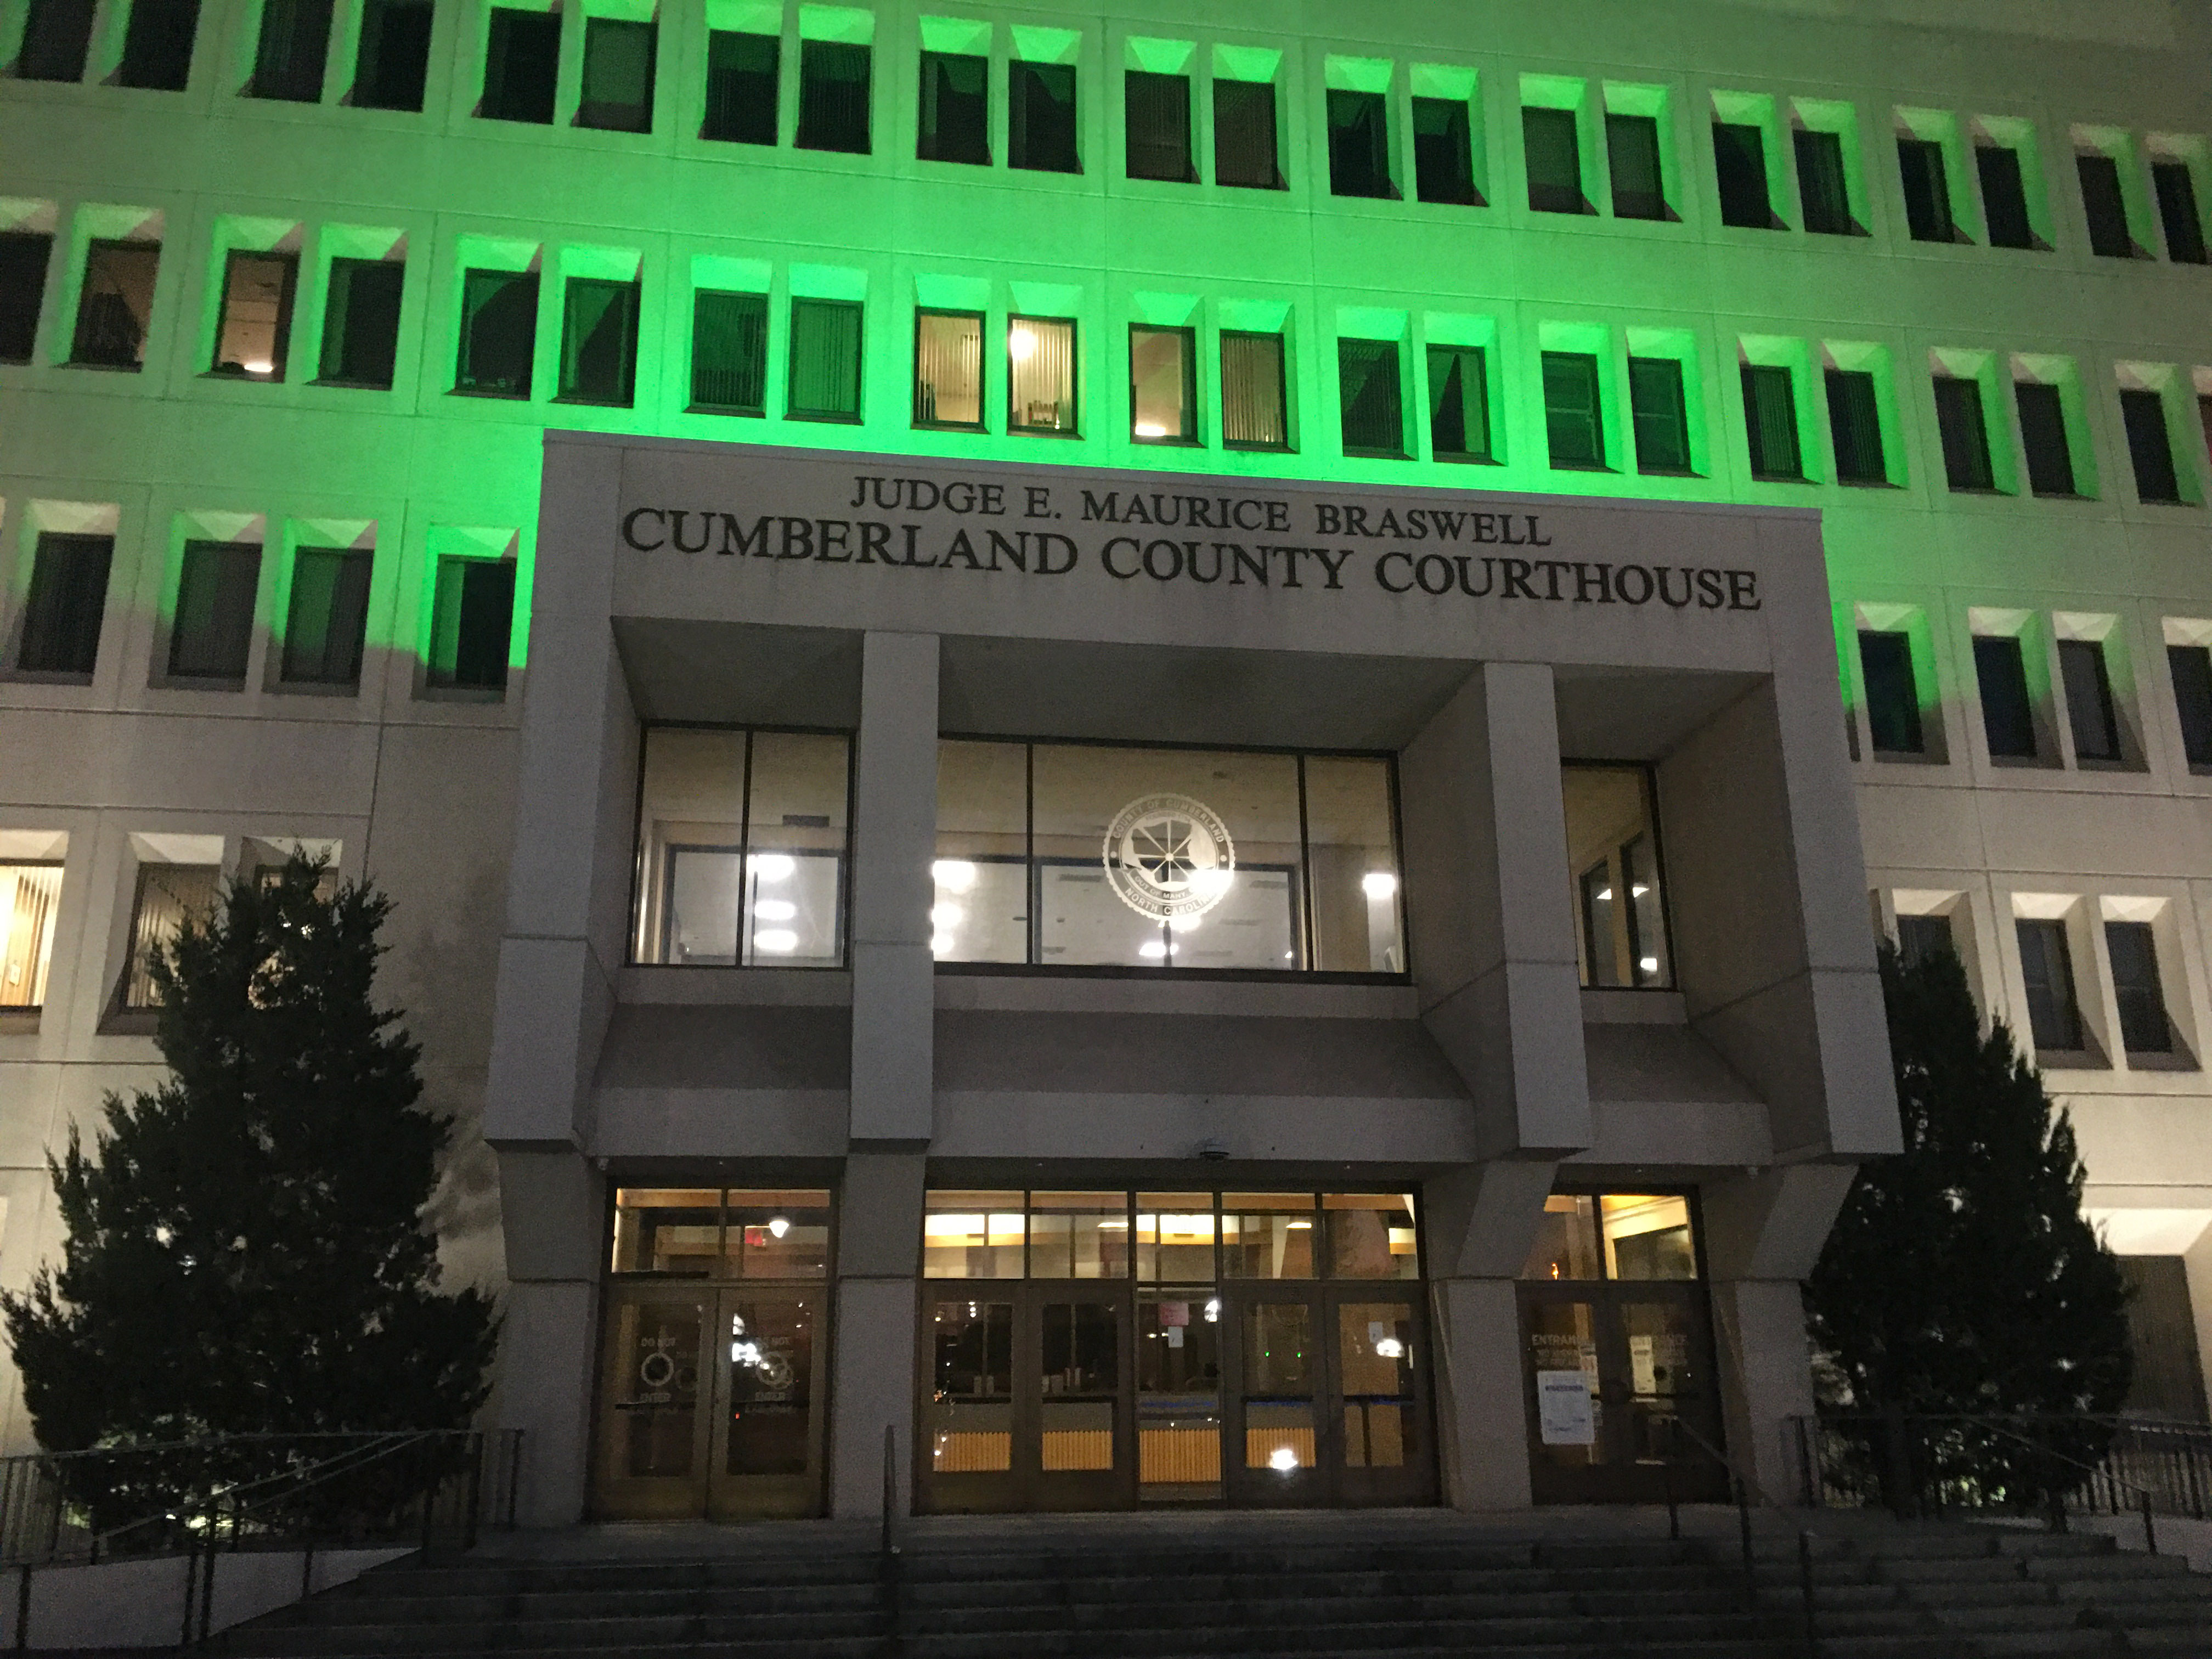 Operation Green Light Courthouse 1